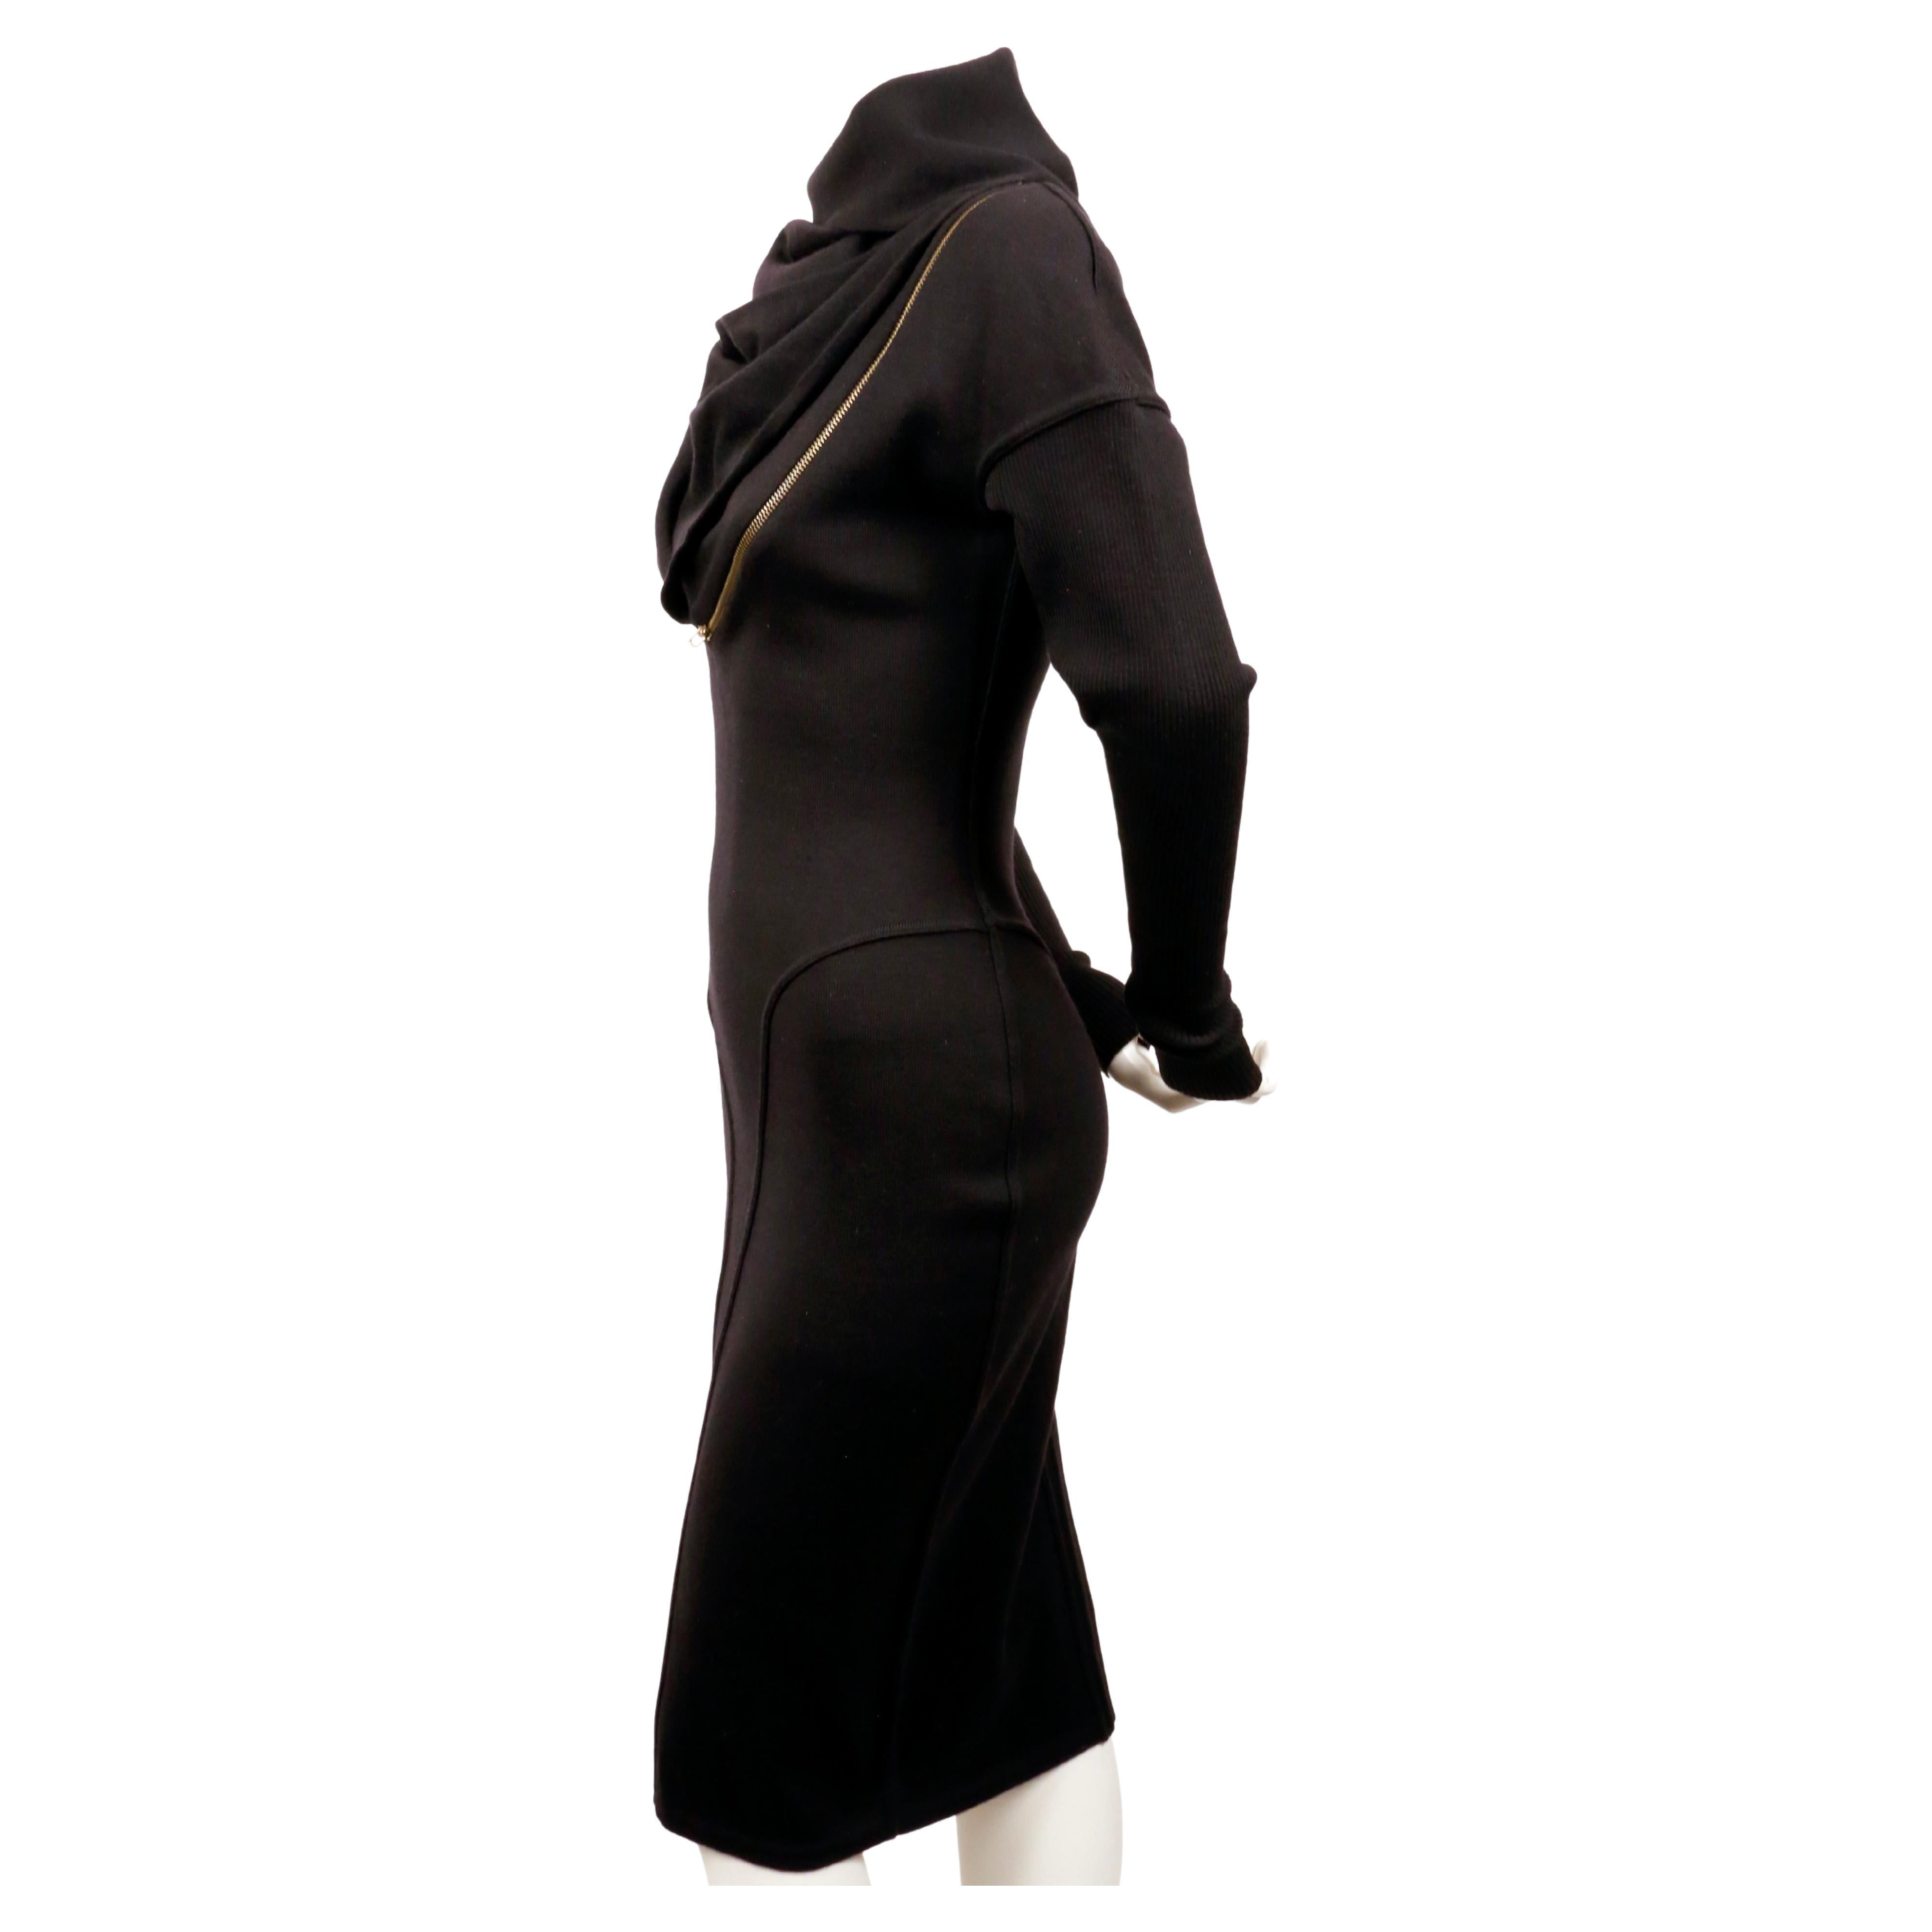 Iconic, jet-black wool, seamed, zipper dress with large hood designed by Azzedine Alaia dating to fall of 1986 as seen on the runway. Well documented piece. Very flattering seams with spiral zipper that cleverly follows the contours of dress seams.